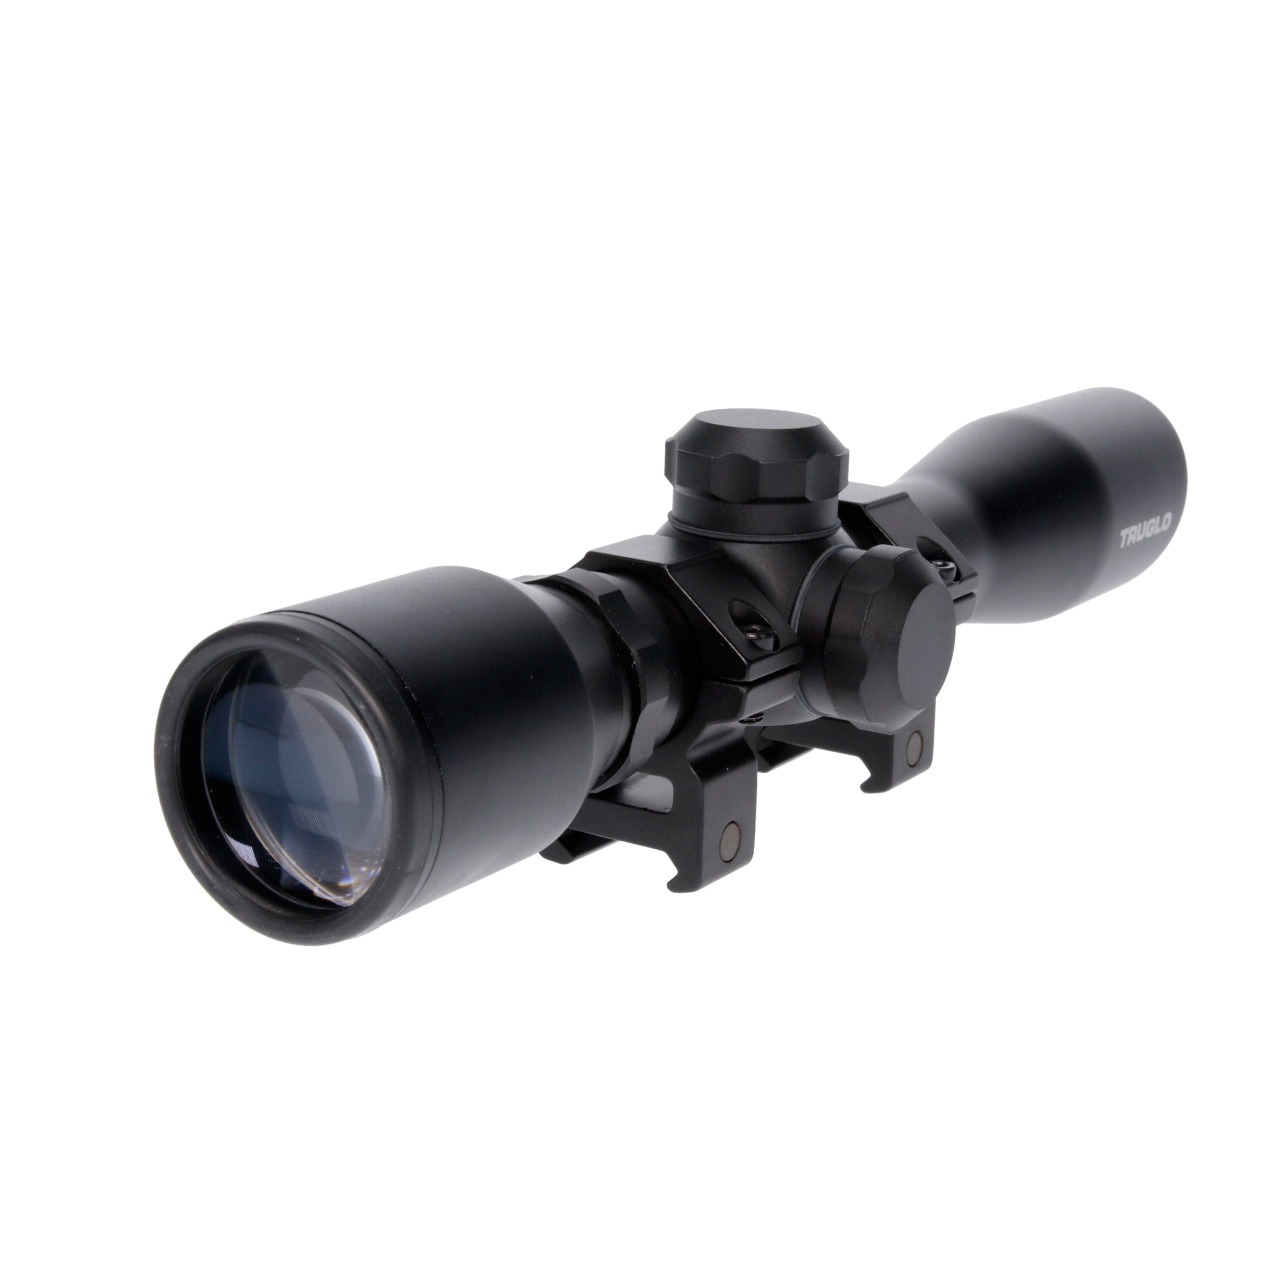 TruGlo Dual Color 4x32mm Illuminated Reticle Crossbow Scope, Black w/Weaver-Style Rings